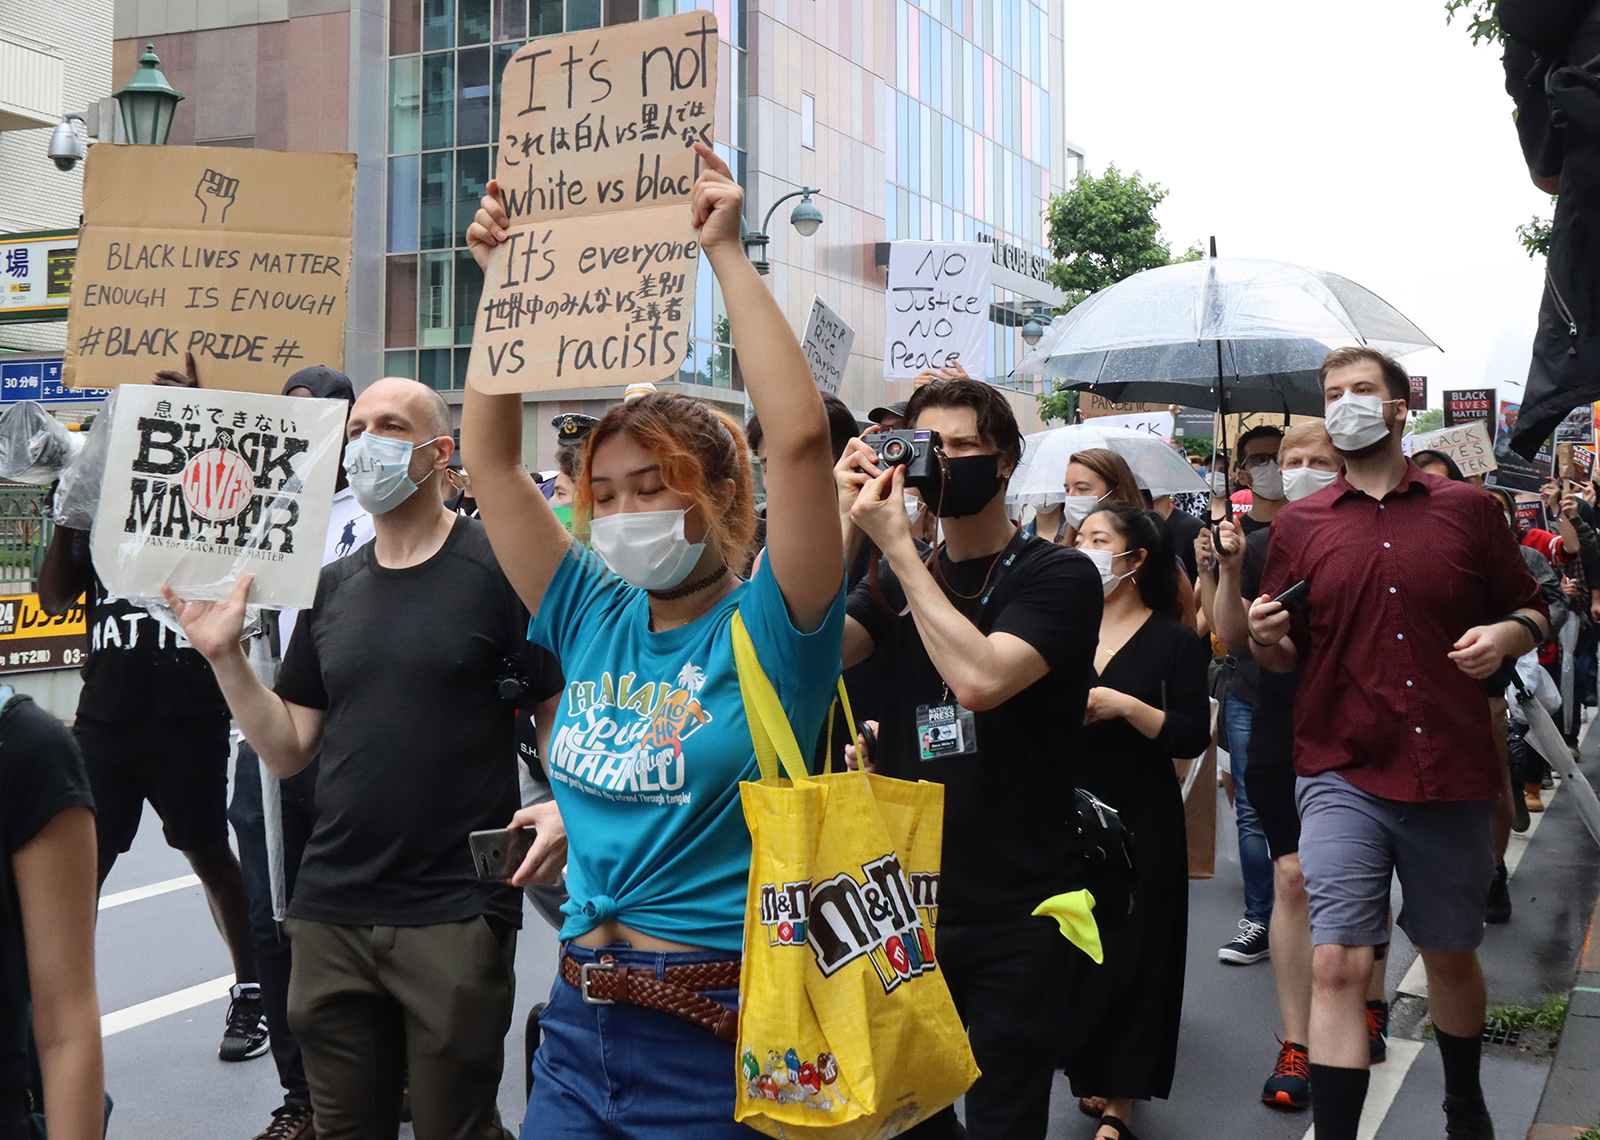 Protestors raising placards march through Shibuya district to protest against racism and violence by police in Tokyo on Sunday, June 14, 2020. Some 1,000 people gather for Black Lives Matter rally as black man George Floyd killed by police in Minneapolis.